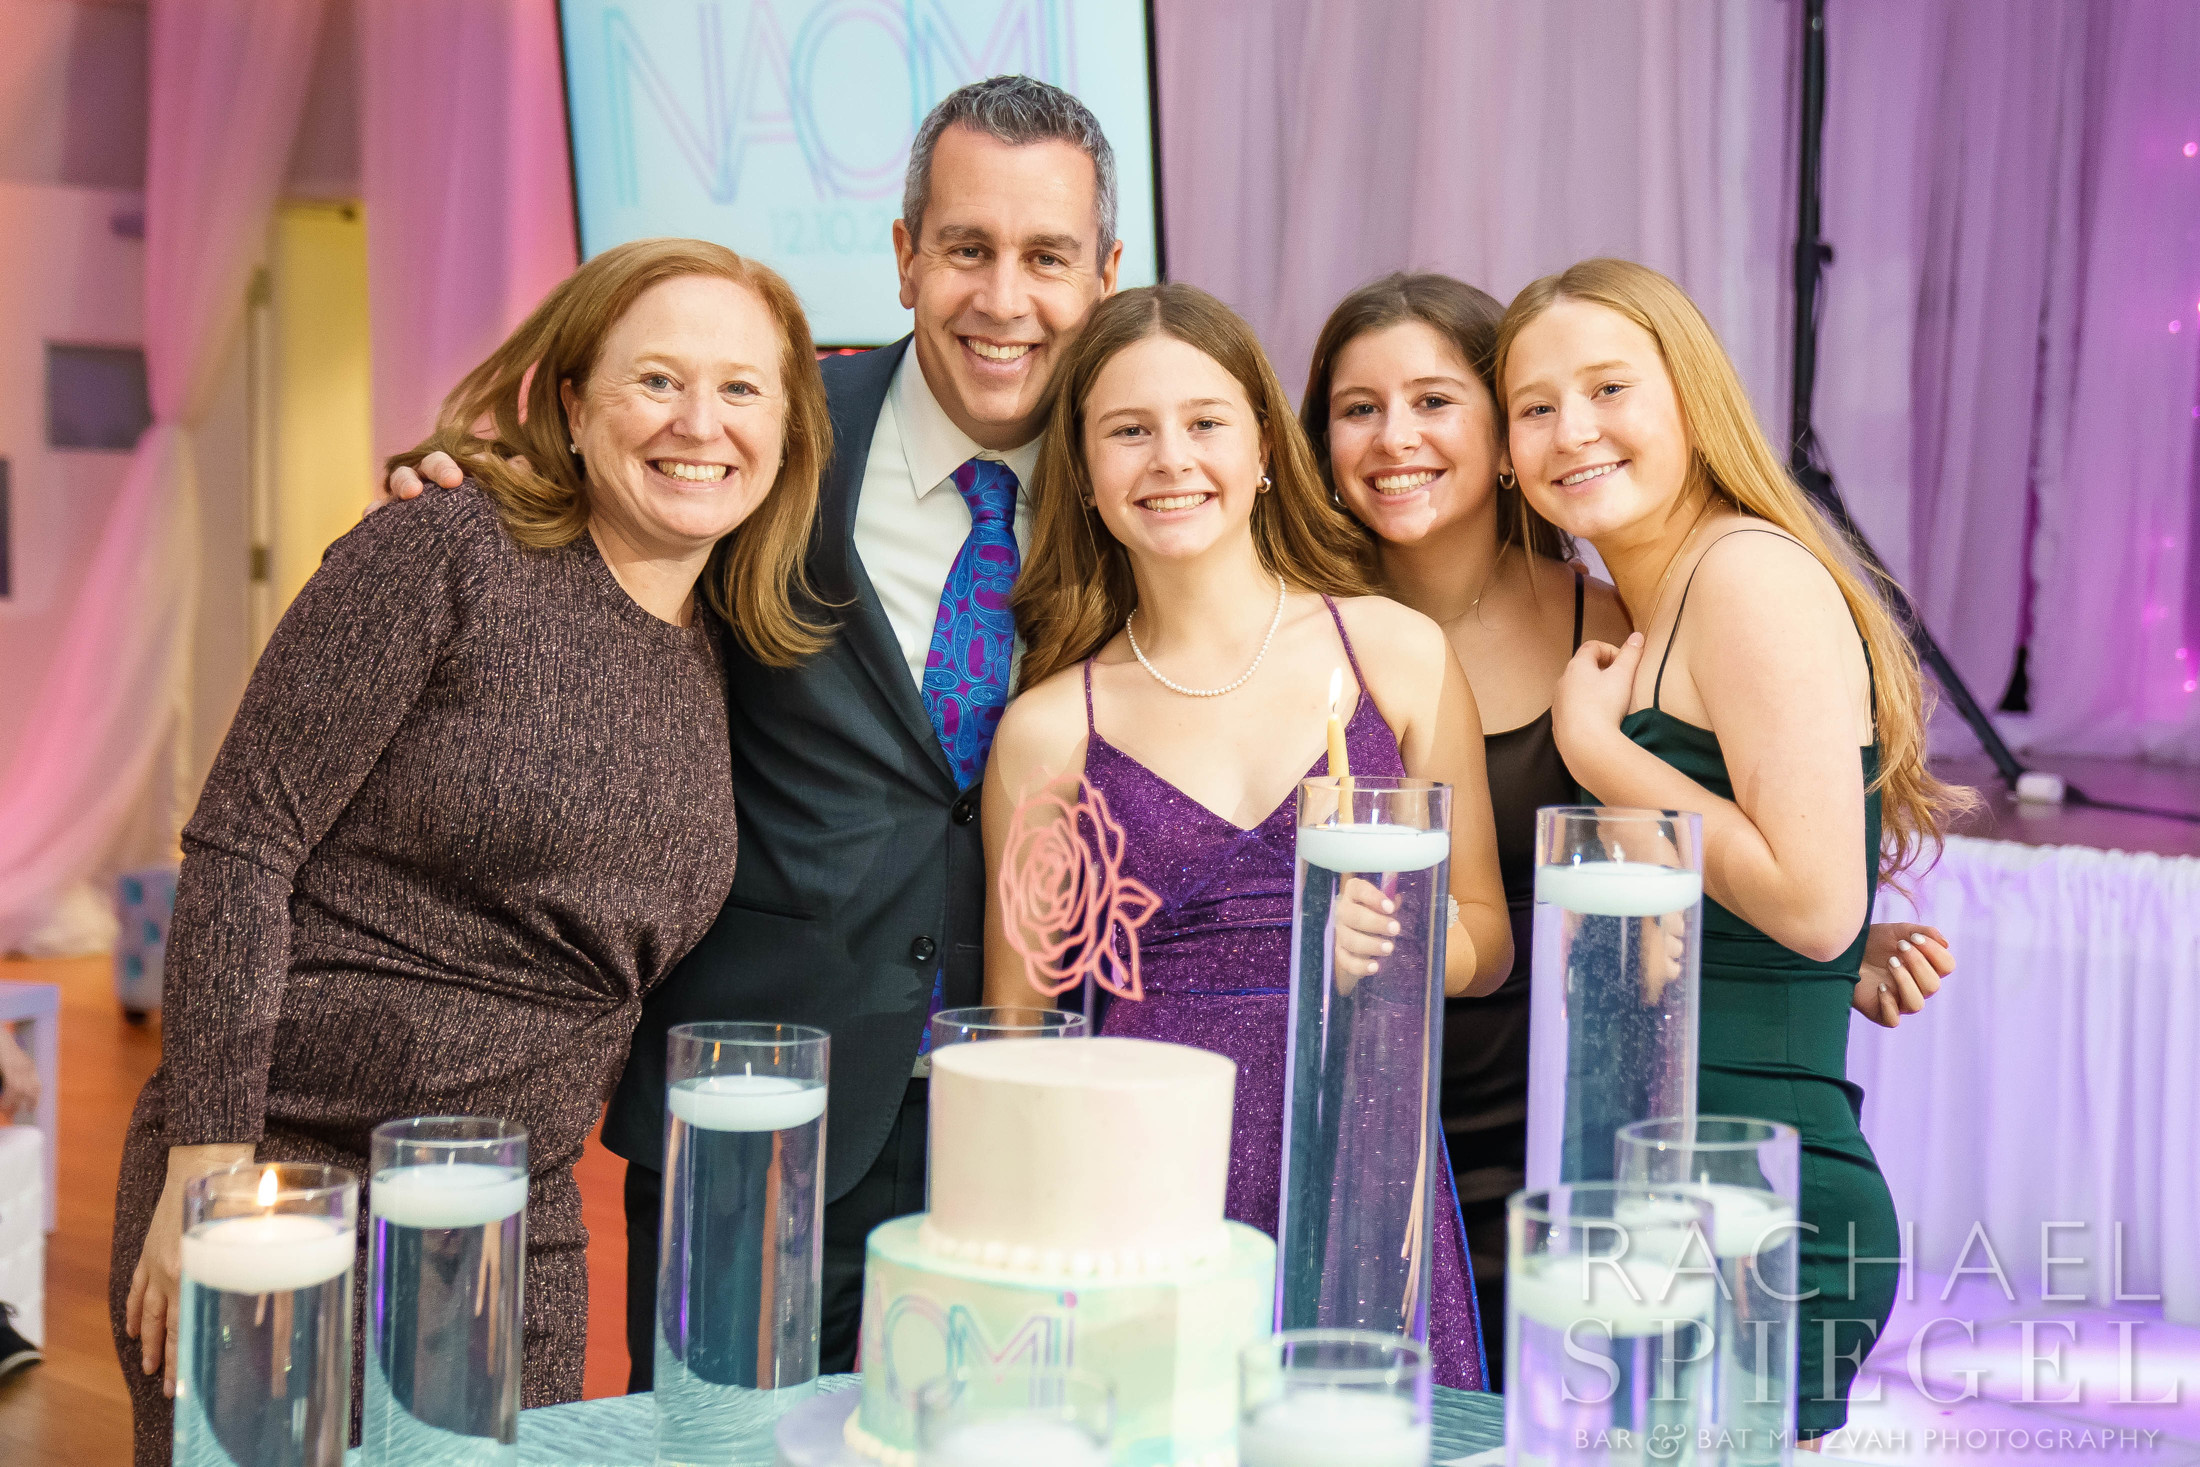 Naomi's pink, purple, blue and white pillow with her logo at Naomi's Pink and Purple Floral Bat Mitzvah Party at Temple Sinai in Washington, DC | Pop Color Events | Adding a Pop of Color to Bar & Bat Mitzvahs in DC, MD & VA | Photo by: Rachael Spiegel Photography